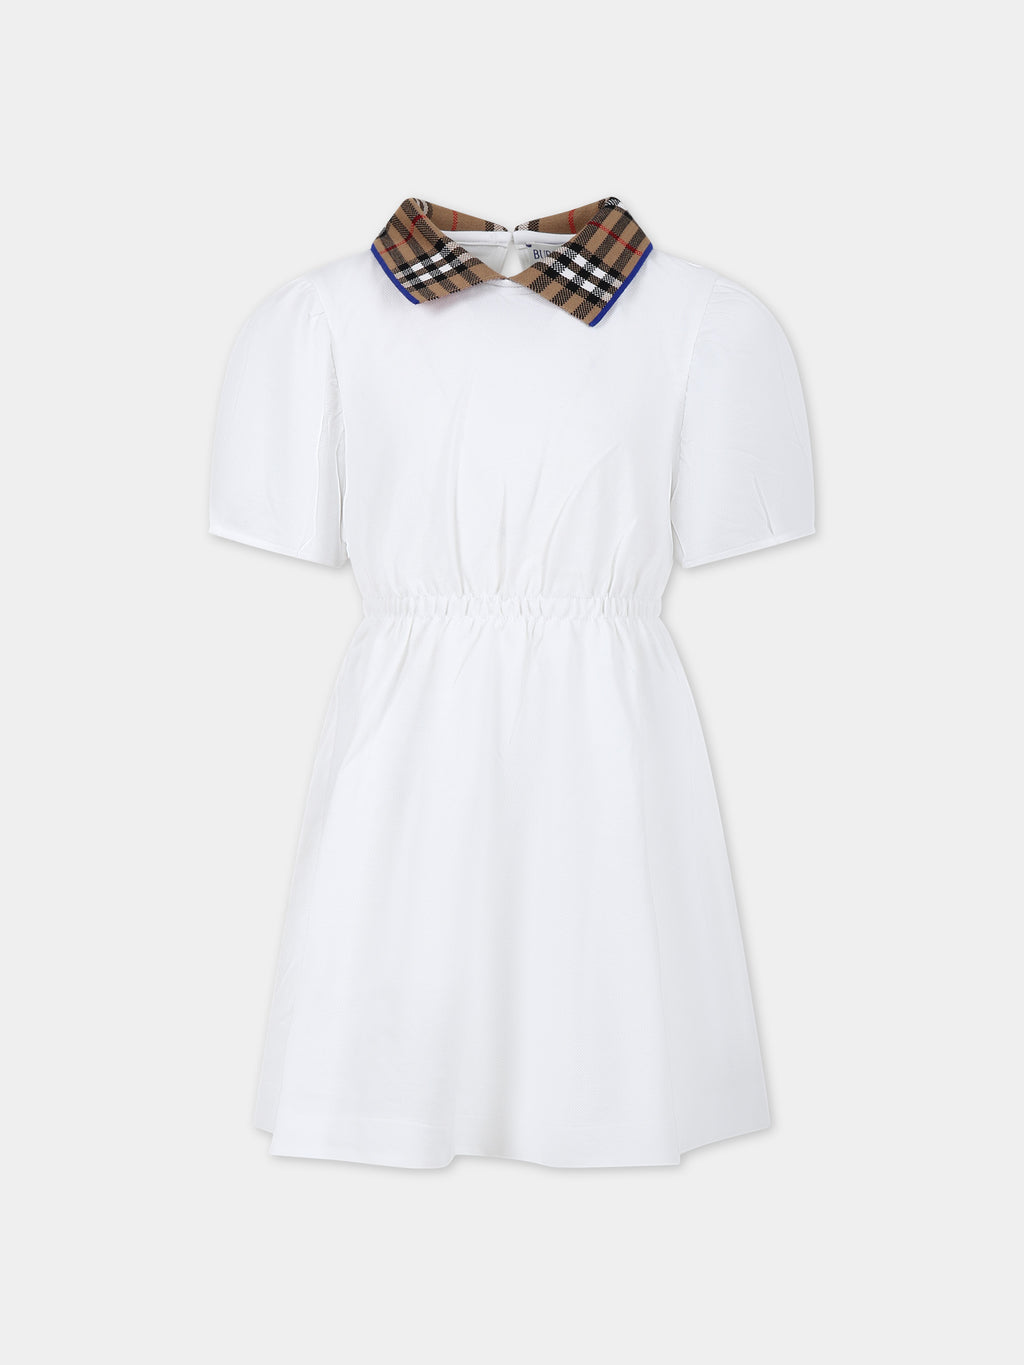 White dress for girl with vintage check on the collar